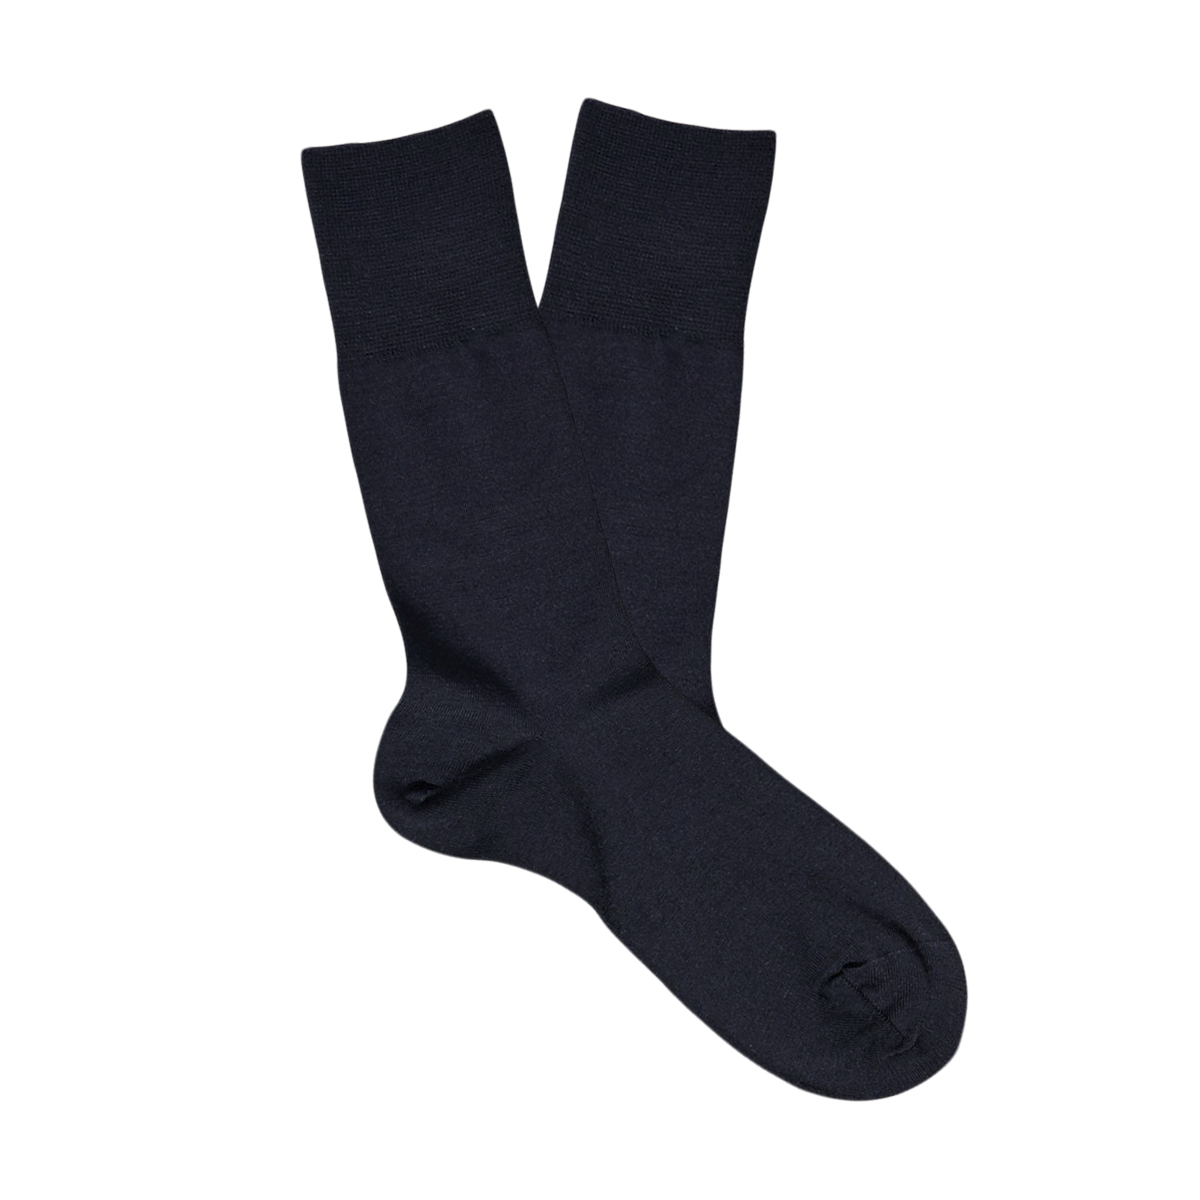 A pair of Navy Airport Wool Cotton Socks by Falke for temperature regulation on a white background.